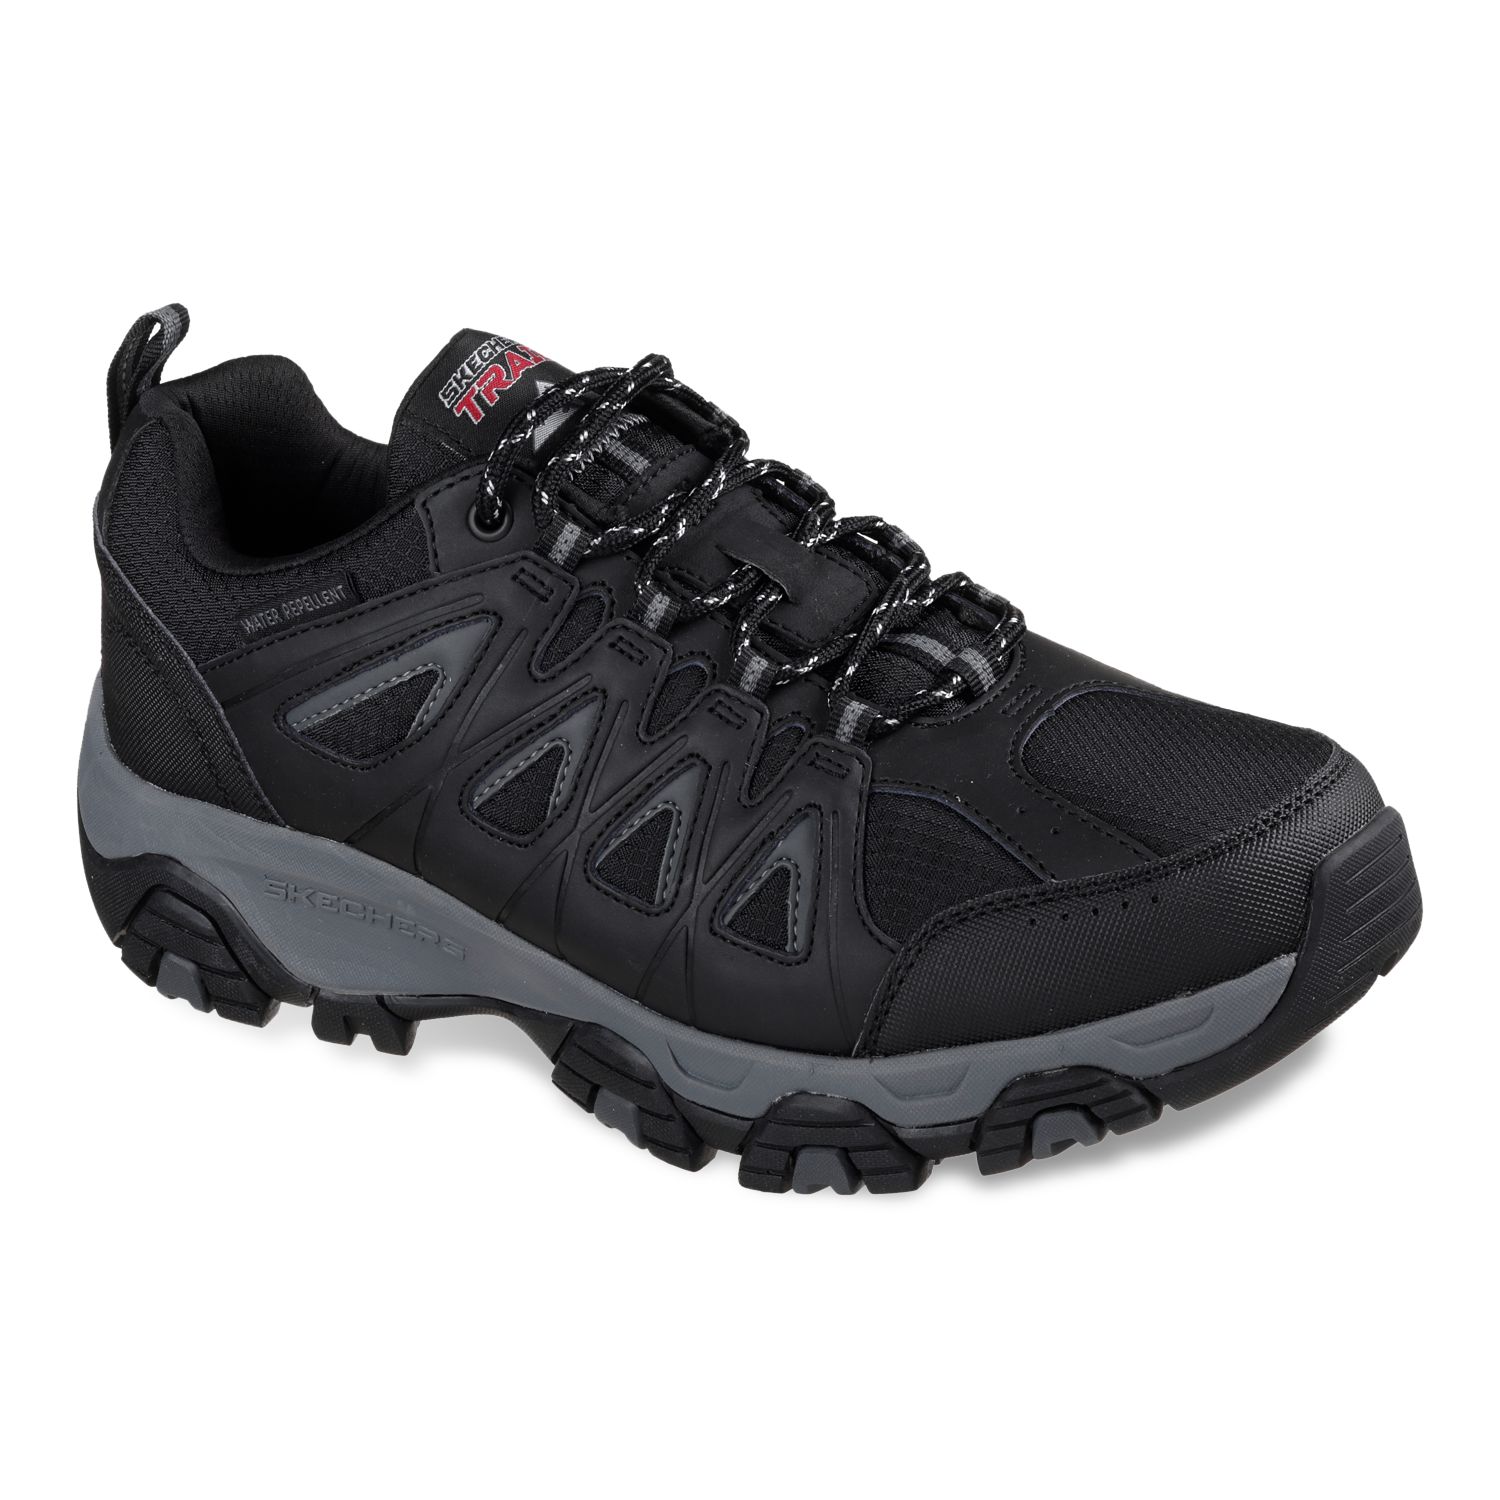 skechers shoes for hiking